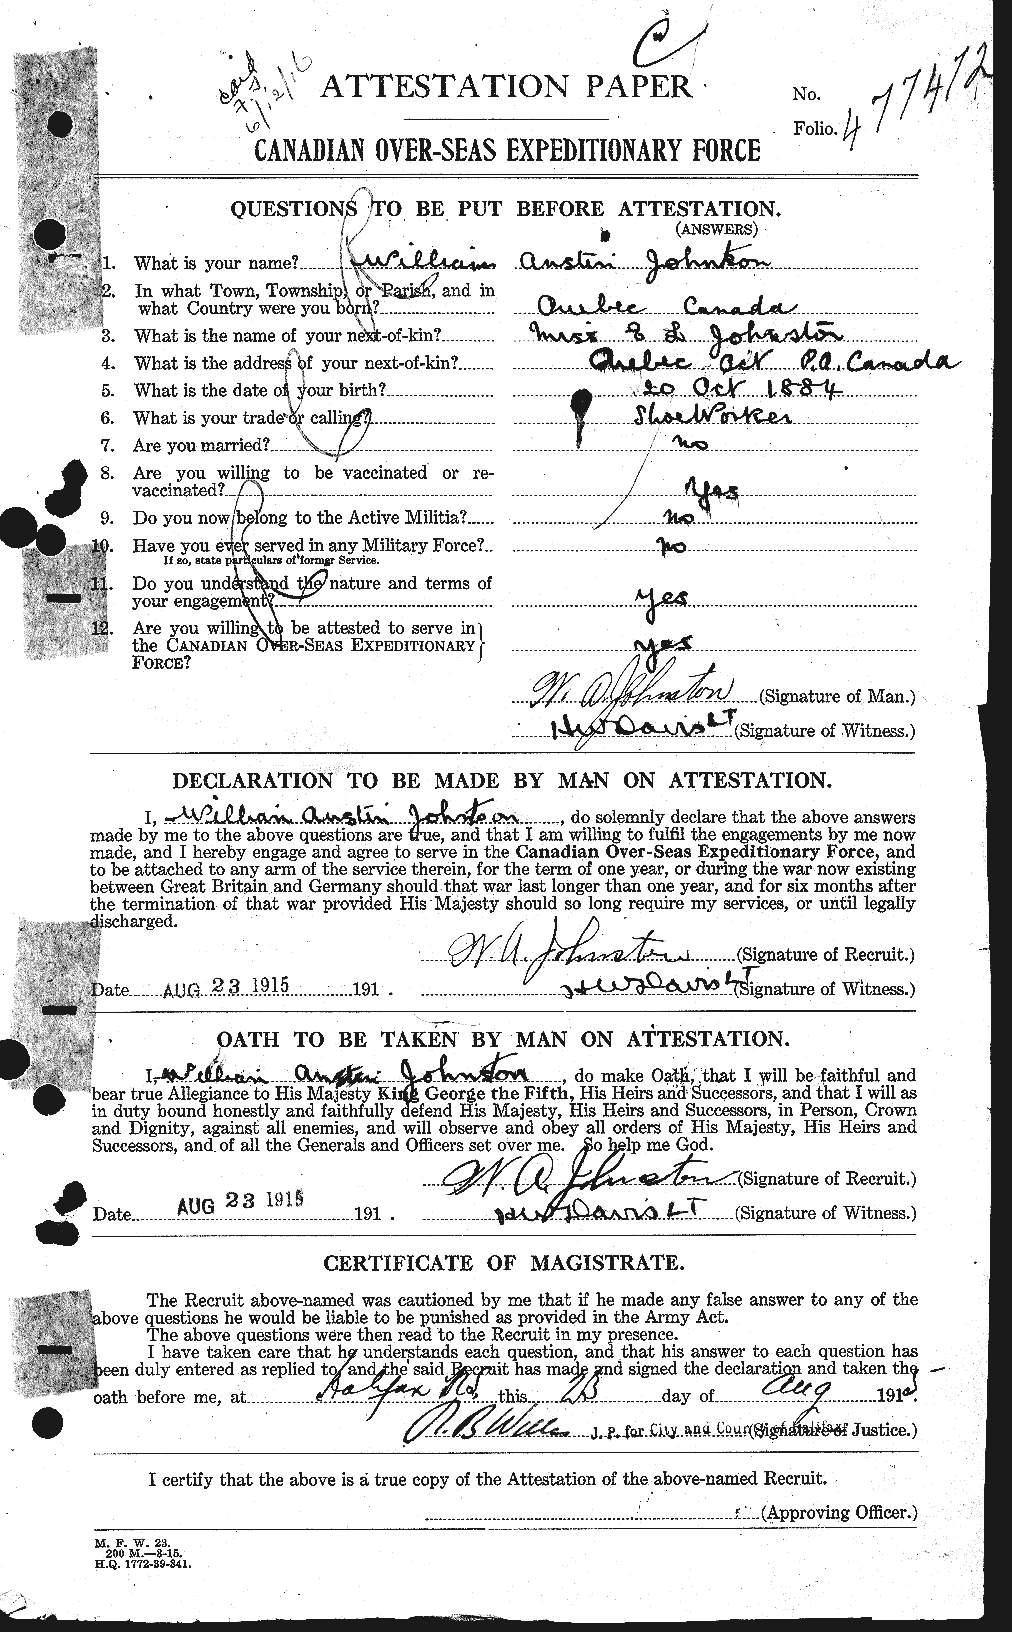 Personnel Records of the First World War - CEF 427304a